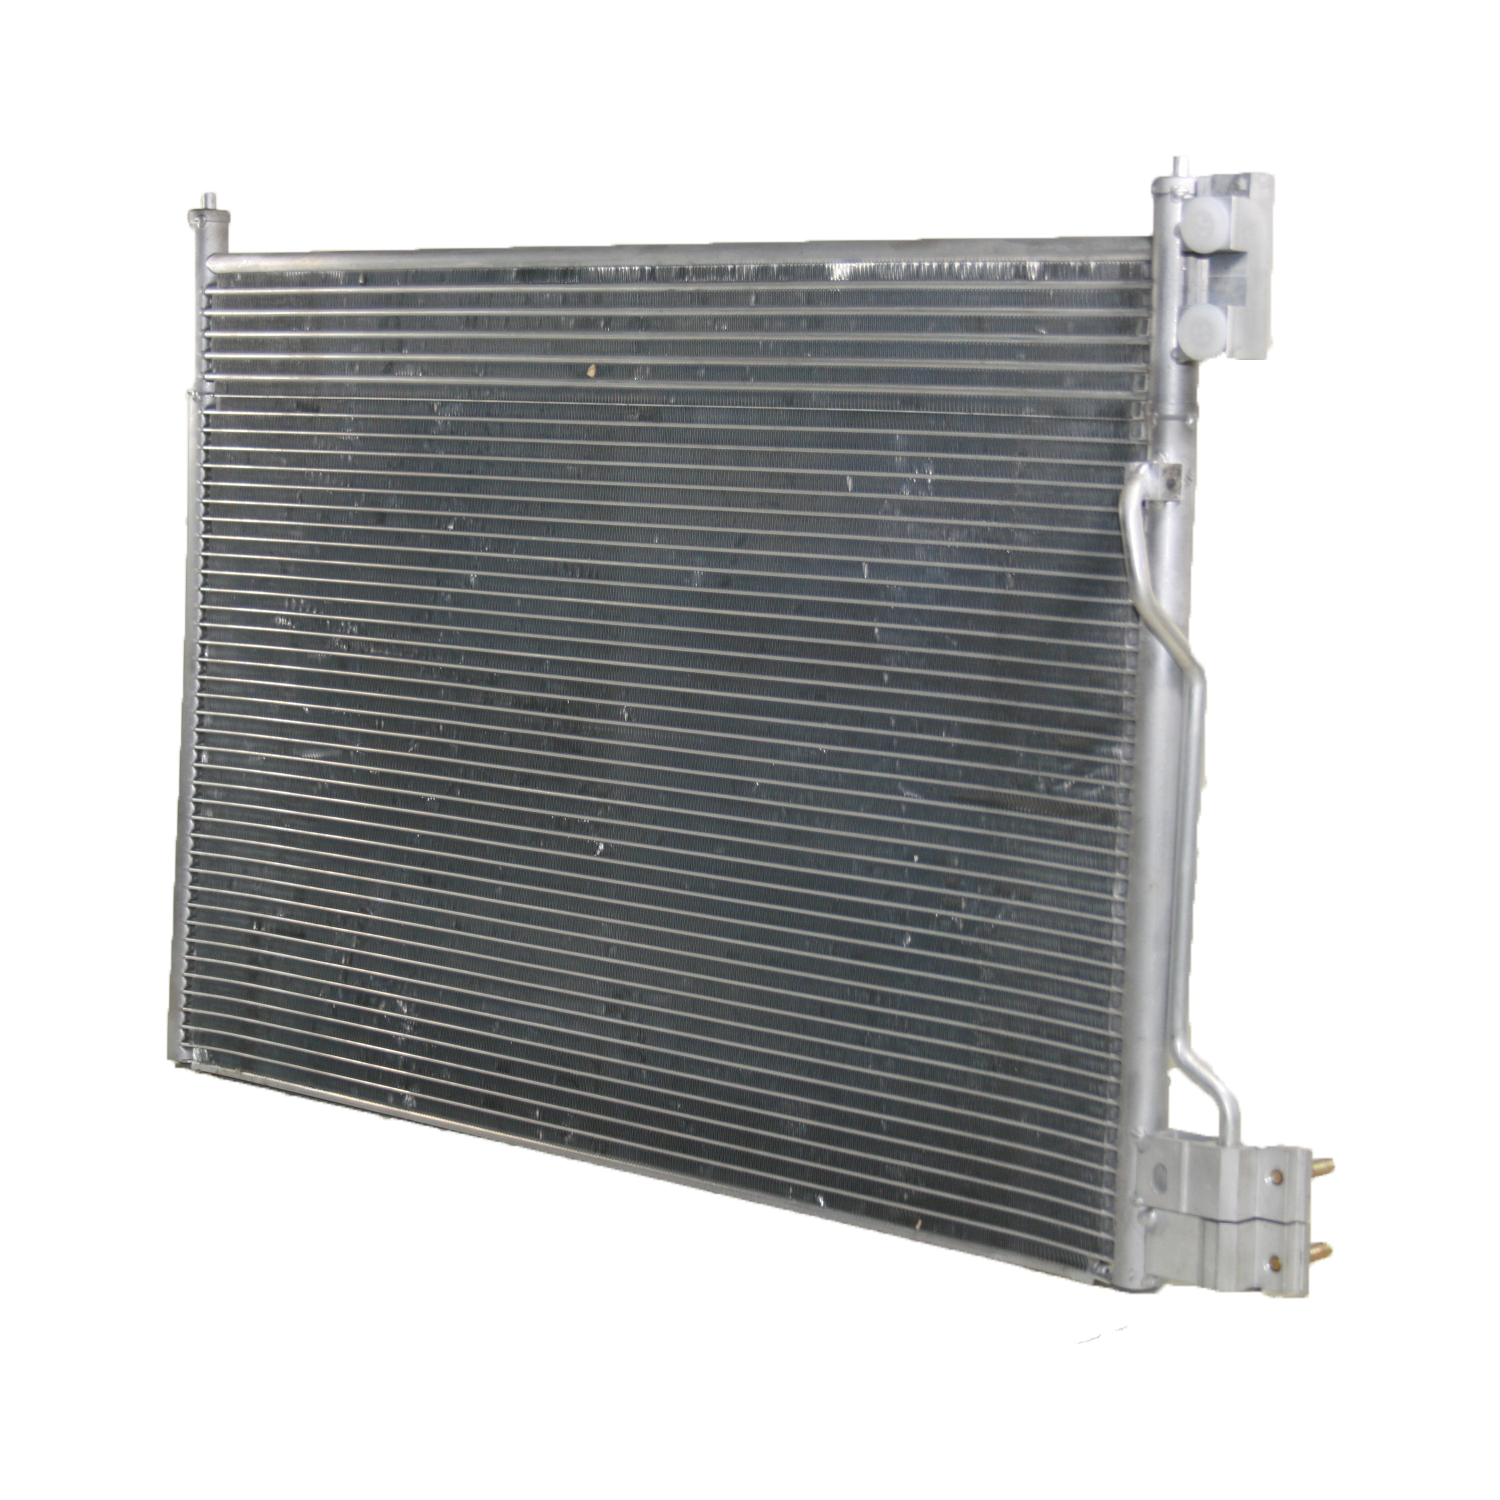 TCW Condenser 44-3557 New Product Image field_60b6a13a6e67c